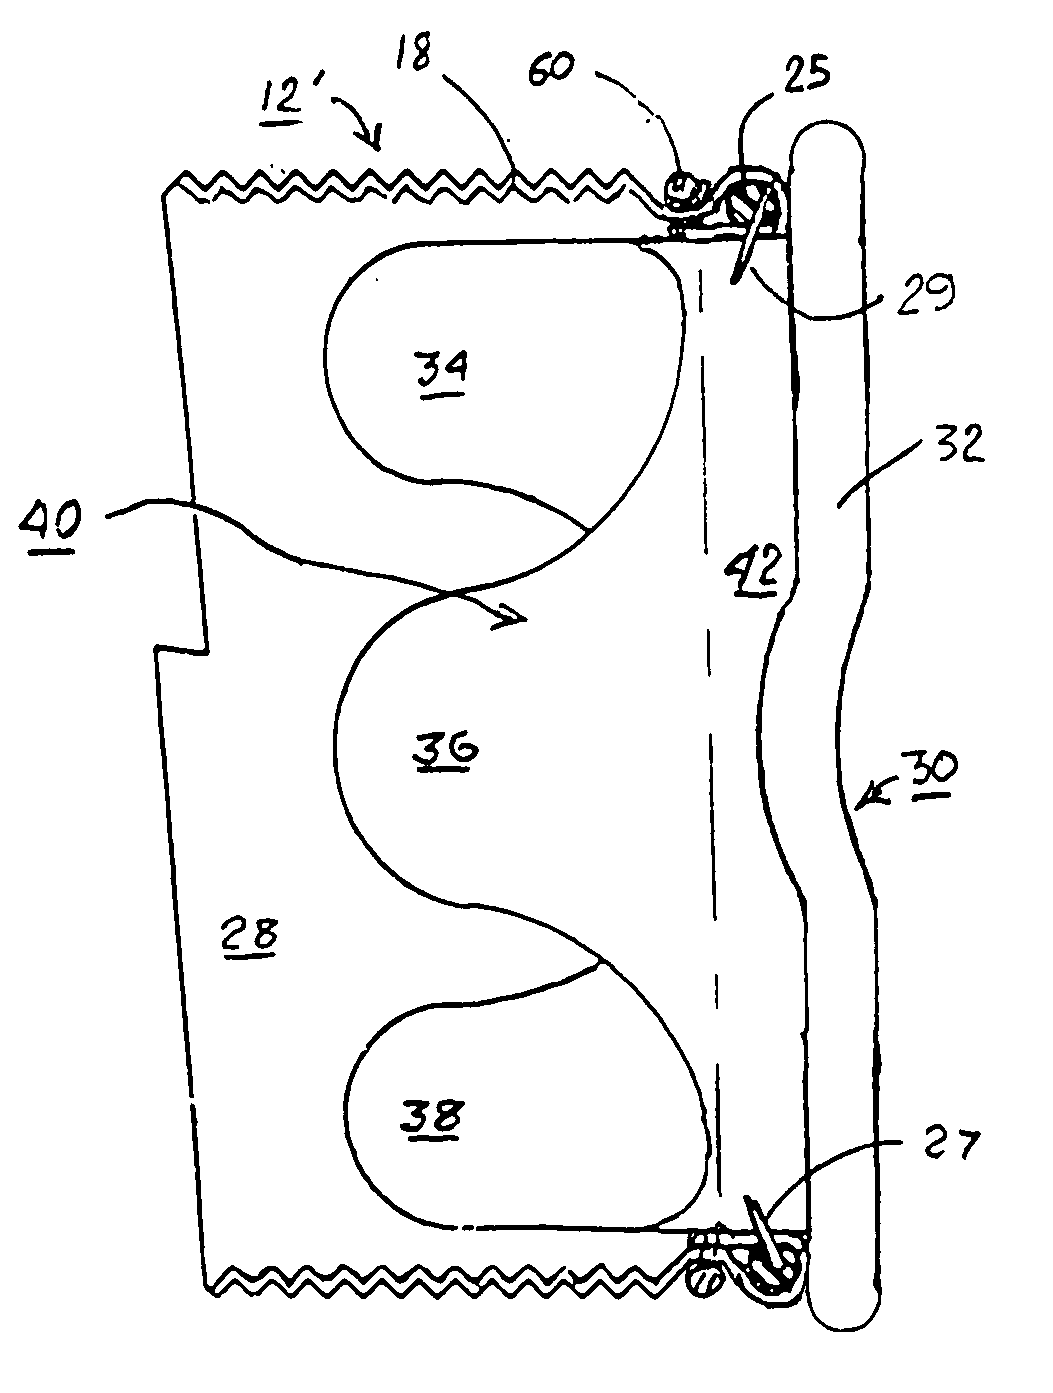 Methods and apparatus for coupling an allograft tissue valve and graft